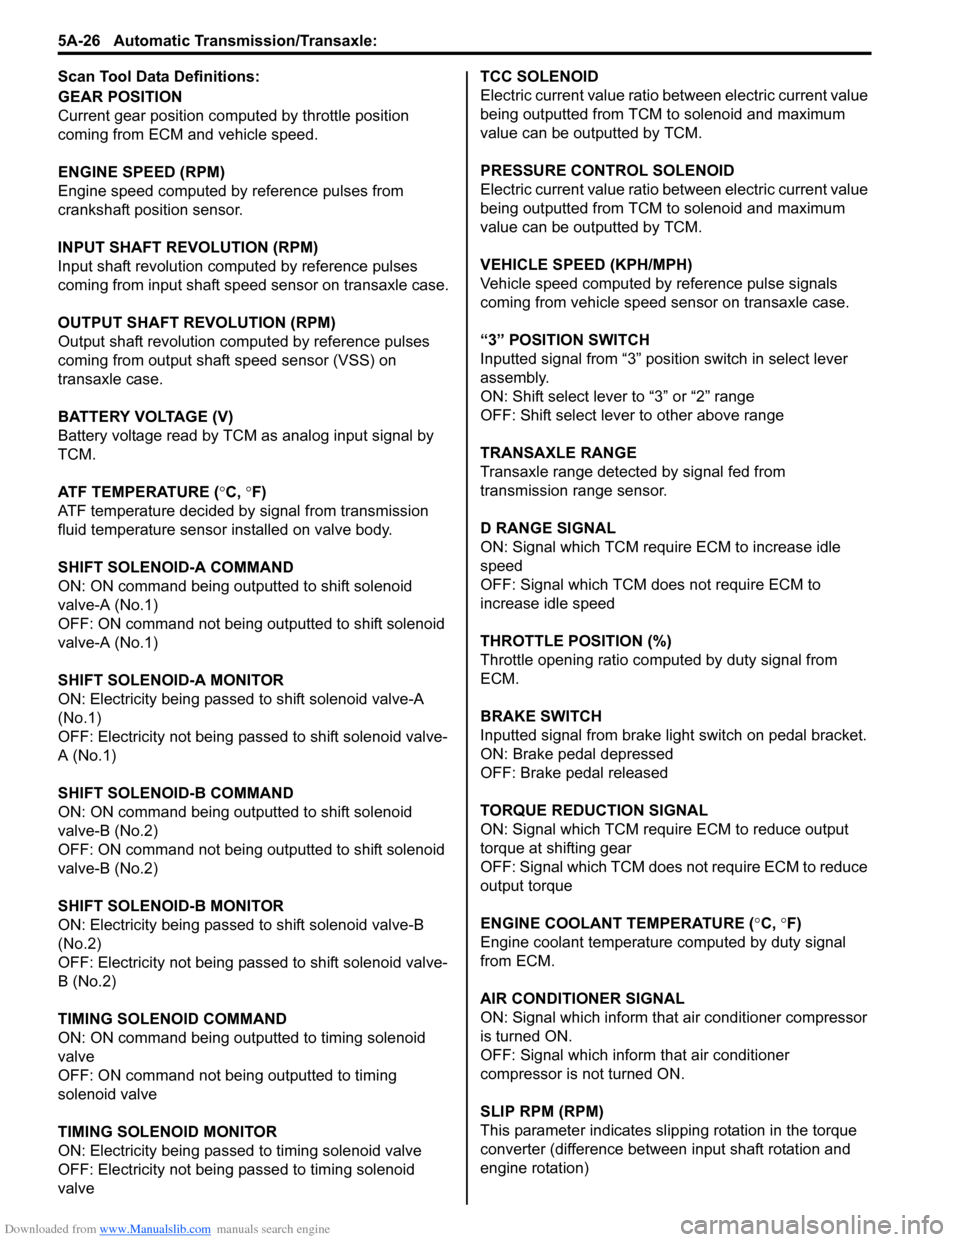 SUZUKI SX4 2006 1.G Service Workshop Manual Downloaded from www.Manualslib.com manuals search engine 5A-26 Automatic Transmission/Transaxle: 
Scan Tool Data Definitions:
GEAR POSITION
Current gear position computed by throttle position 
coming 